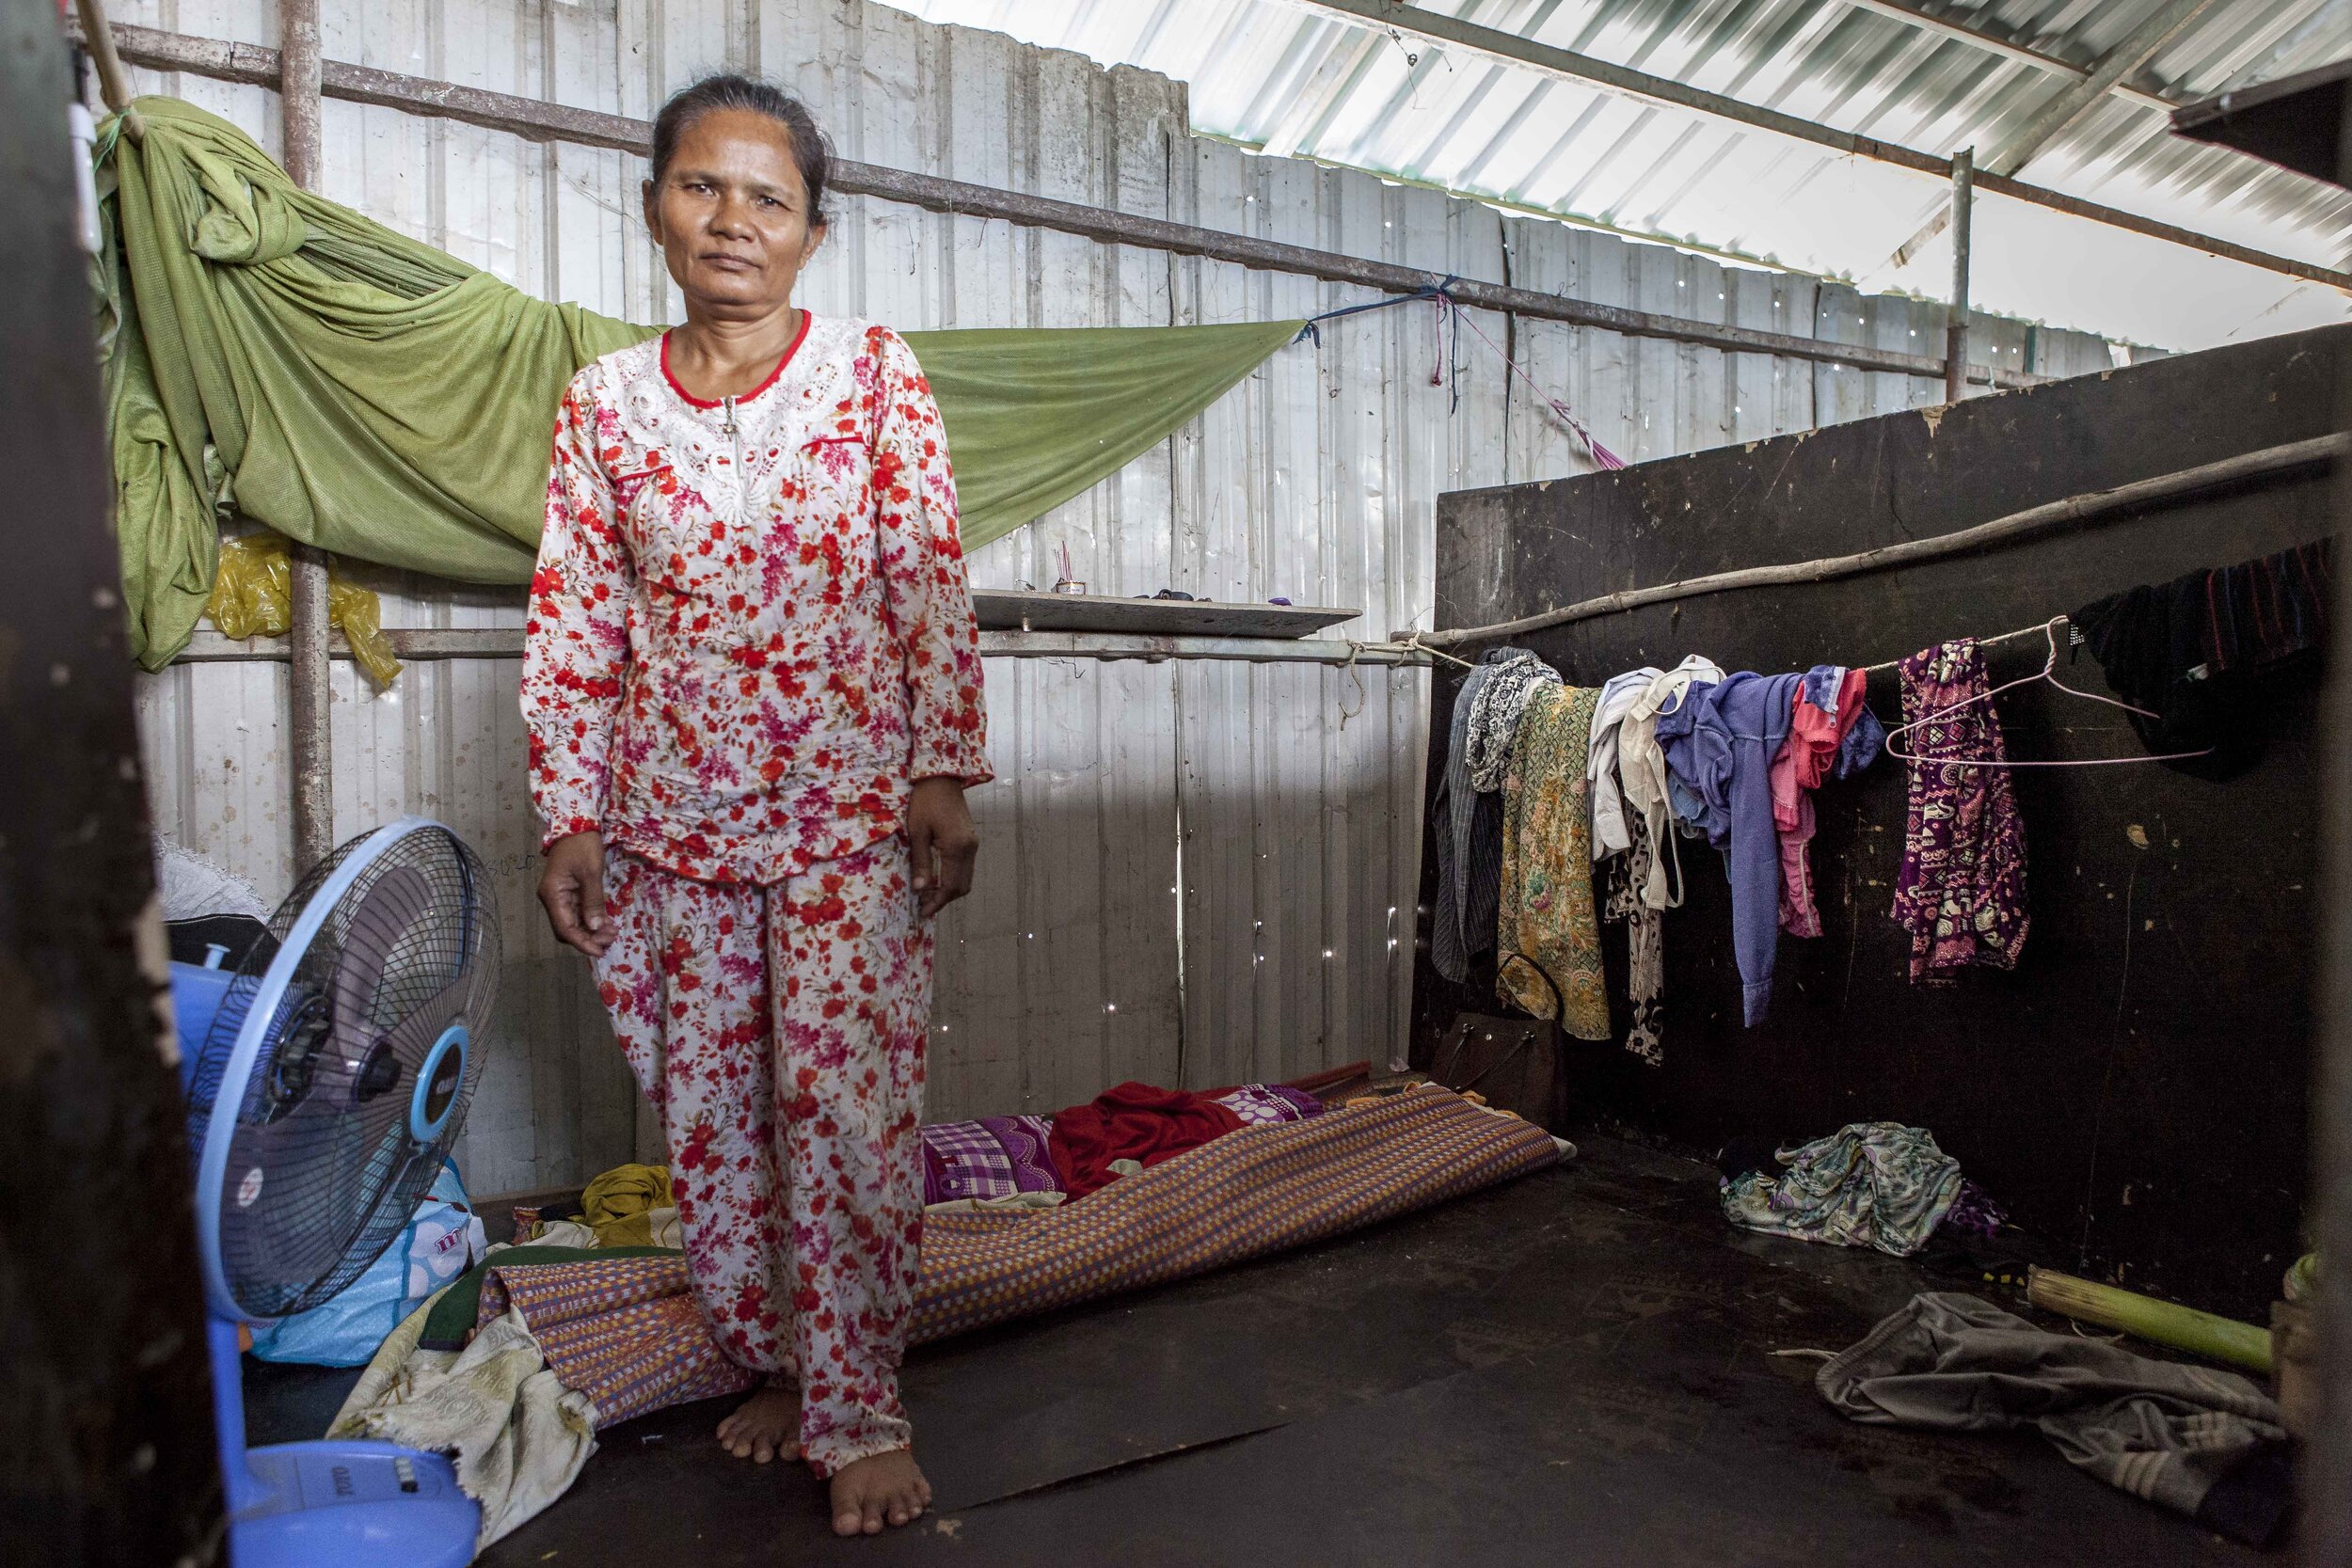  Em Seng, 53 years old and from Prey Veng province, stands in her home on the grounds of the 'Phnom Penh City Centre' construction site. 